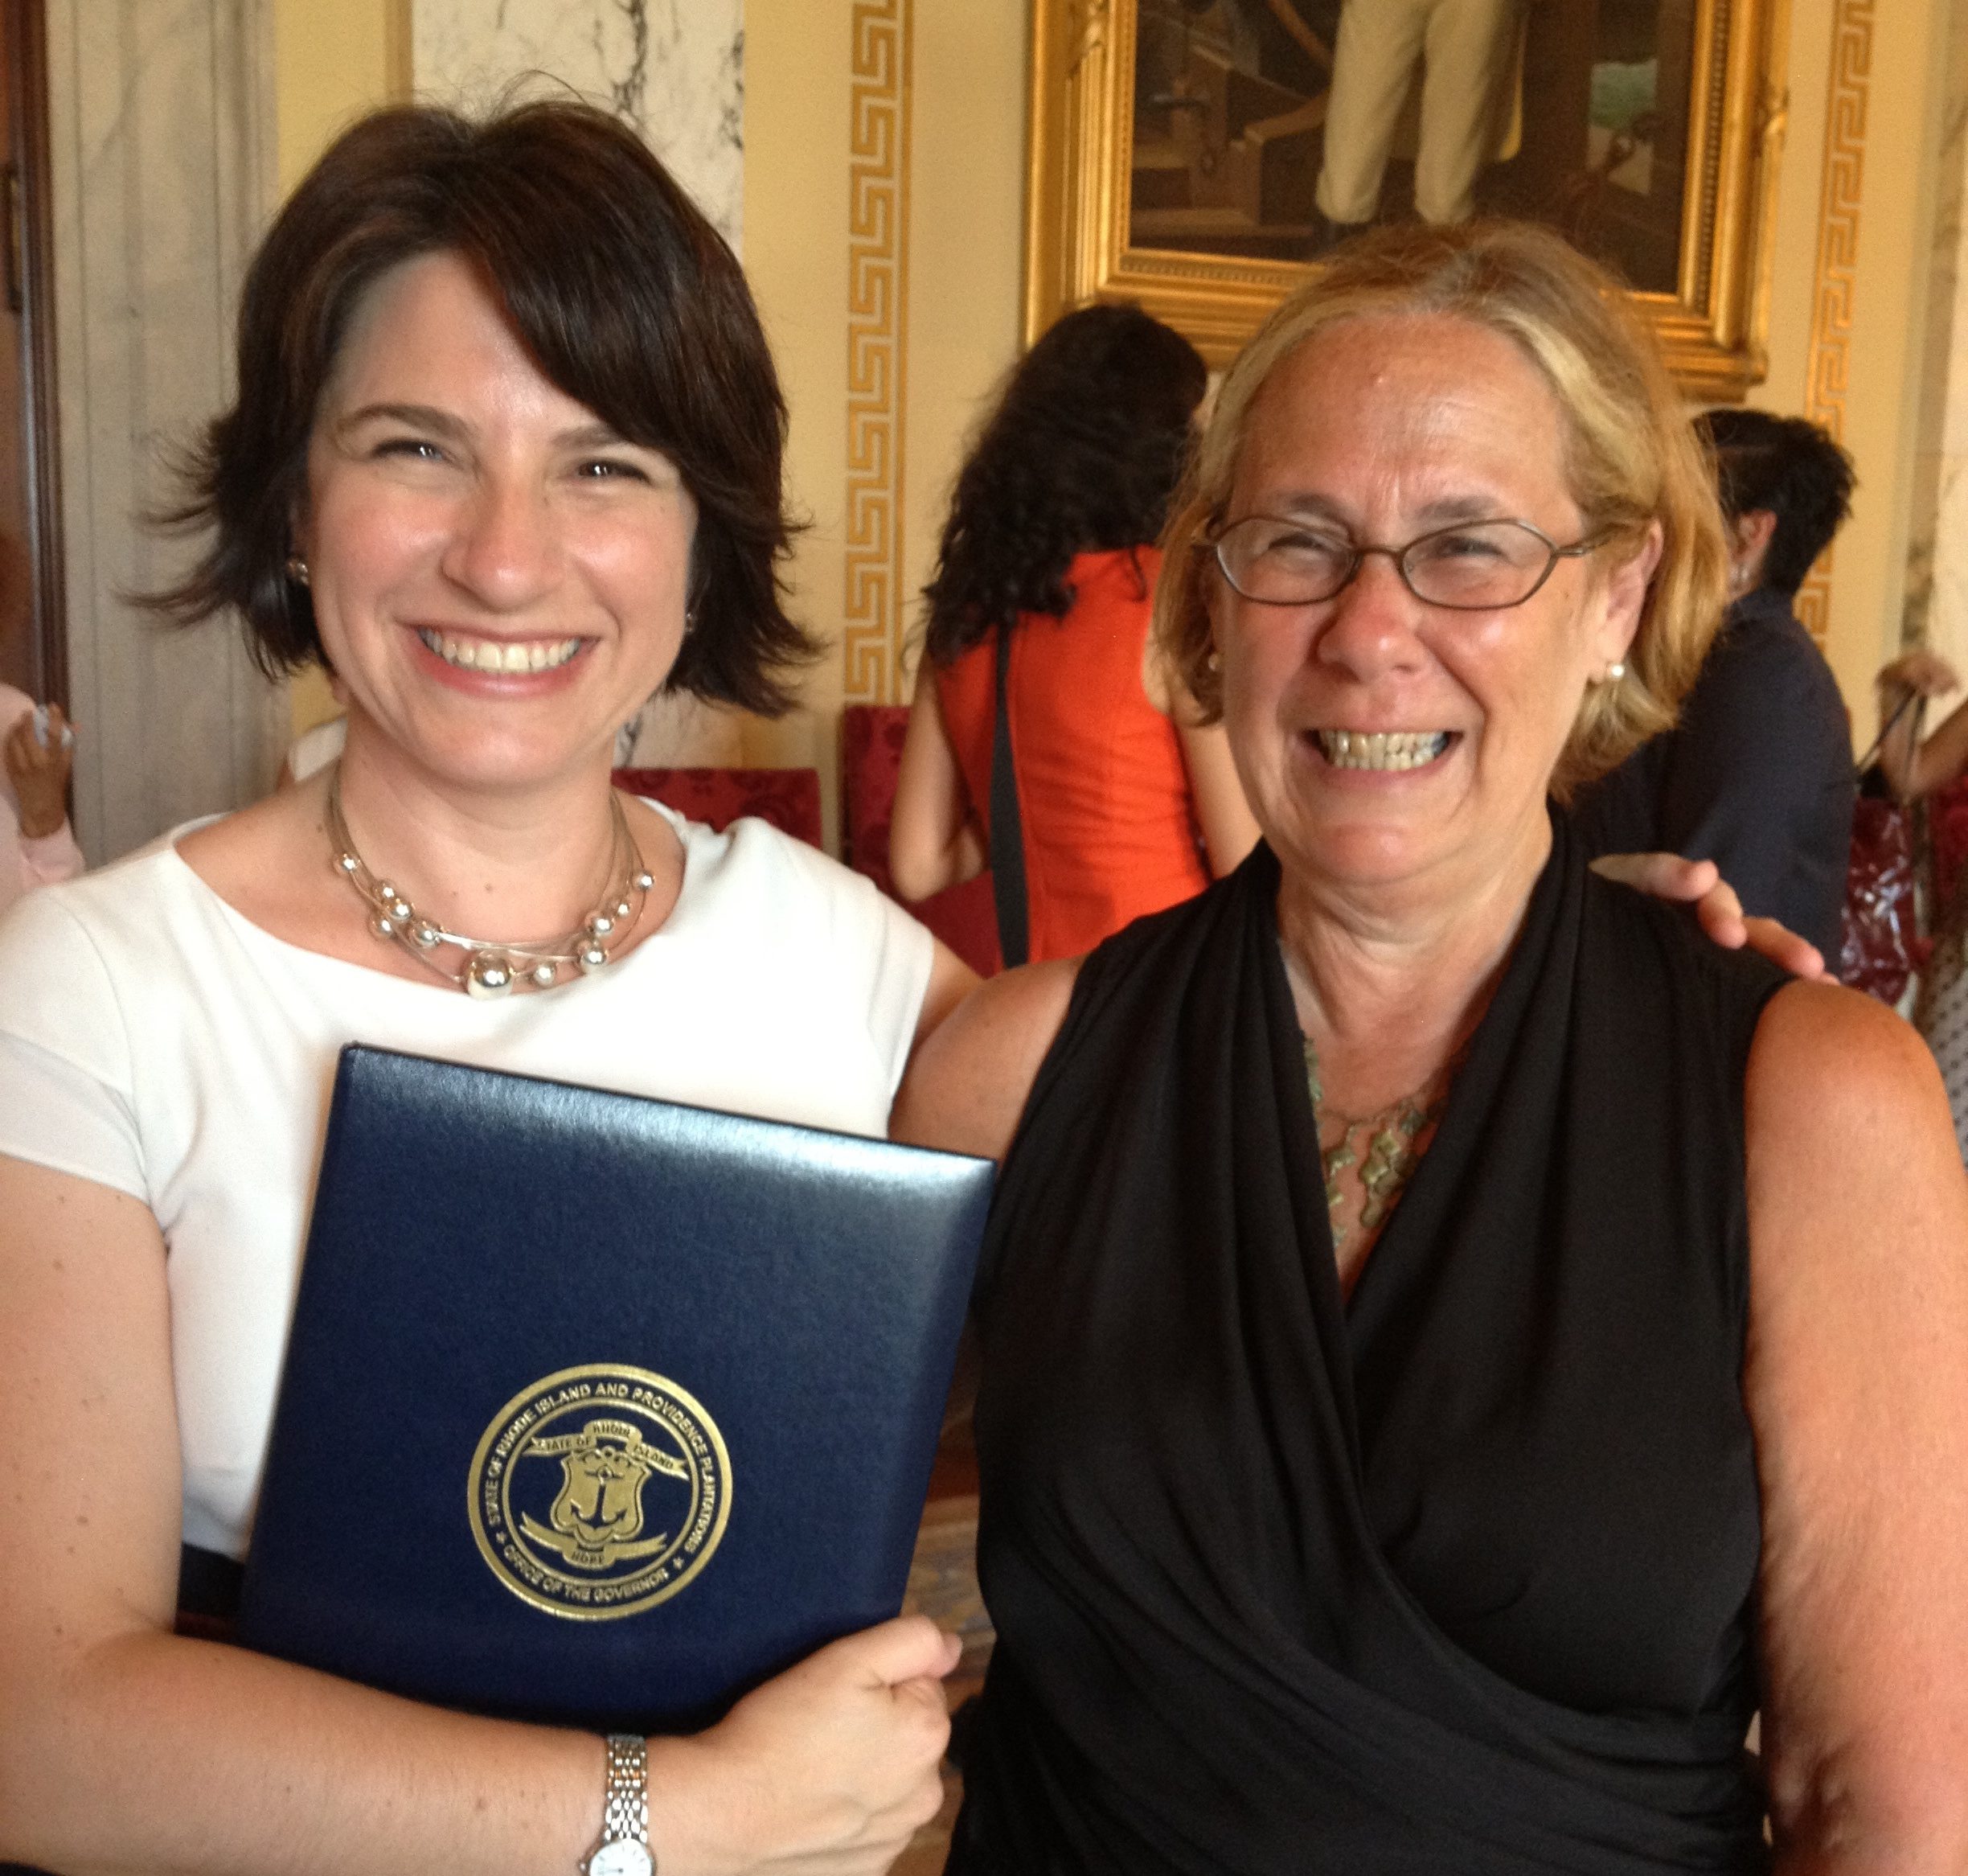 Sherry of A Better Balance with the Bill's Senate Sponsor, Gayle Goldin